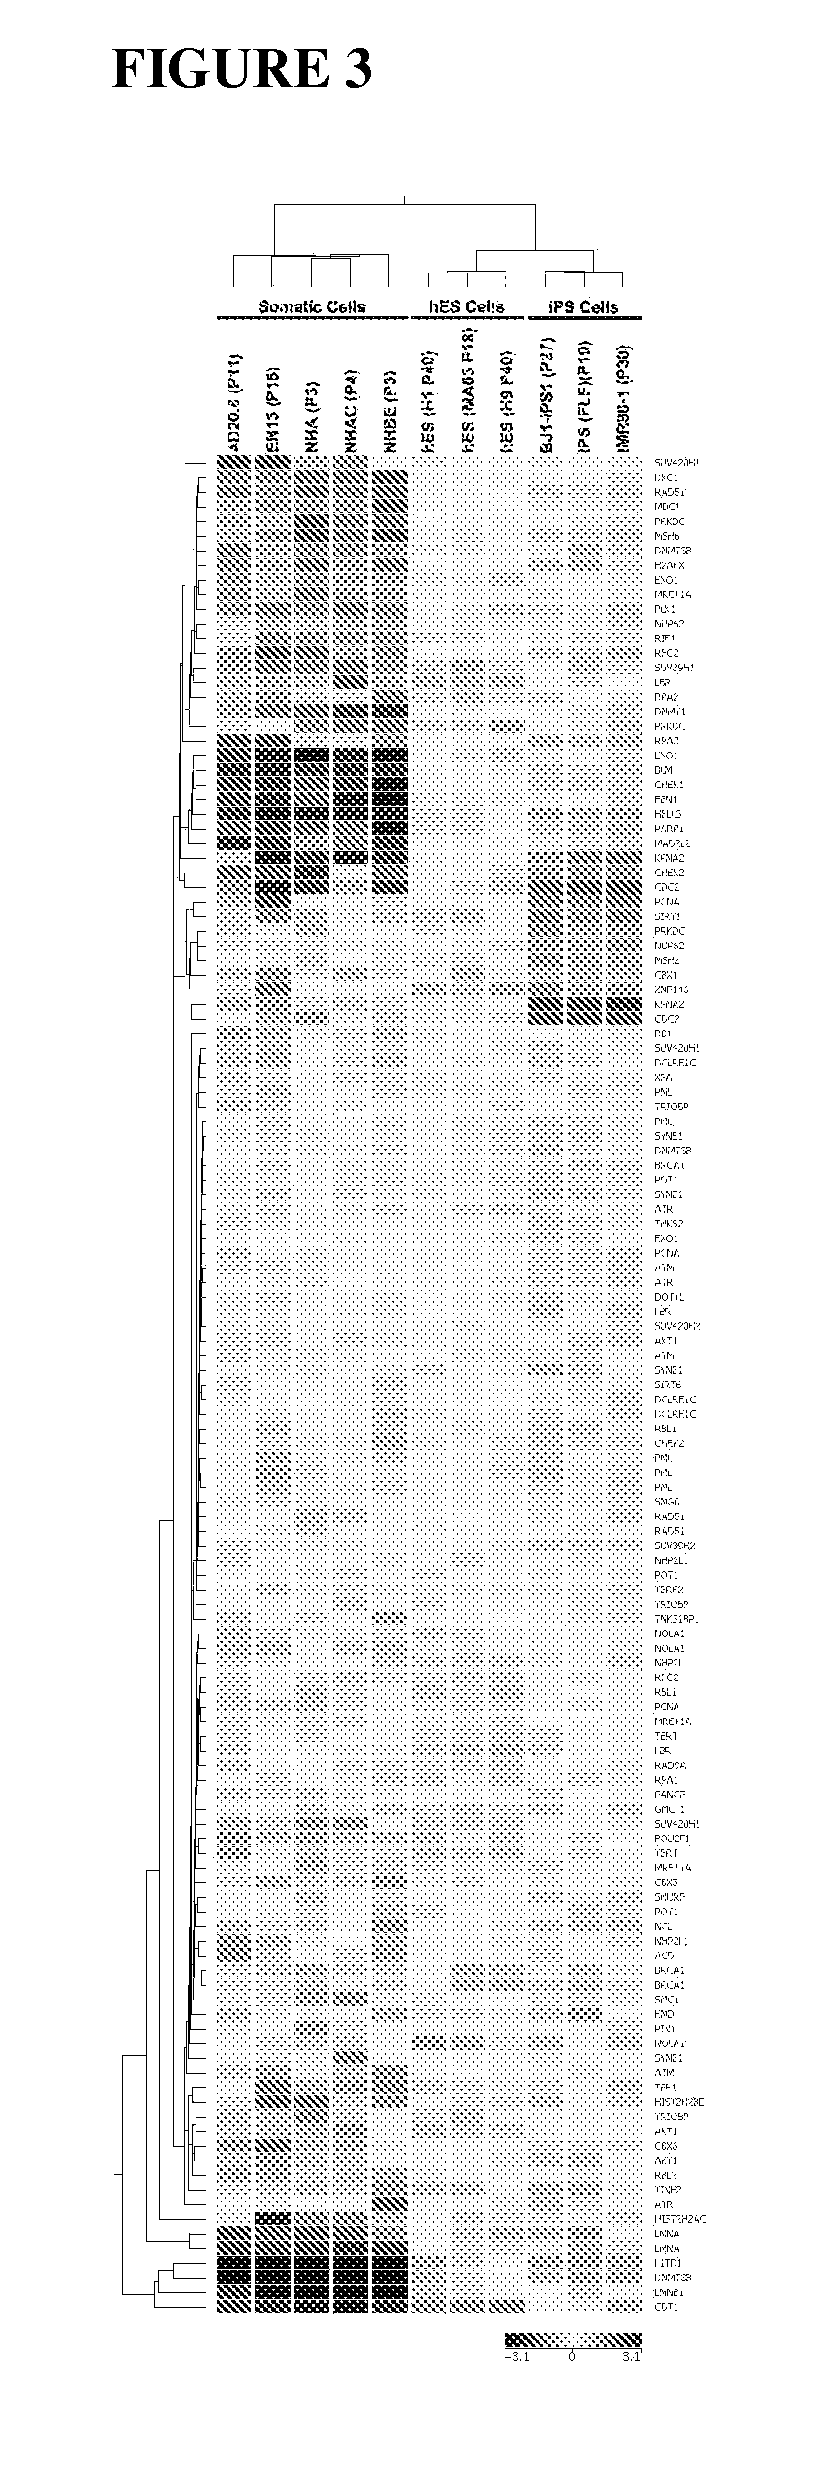 Methods for telomere length and genomic DNA quality control and analysis in pluripotent stem cells